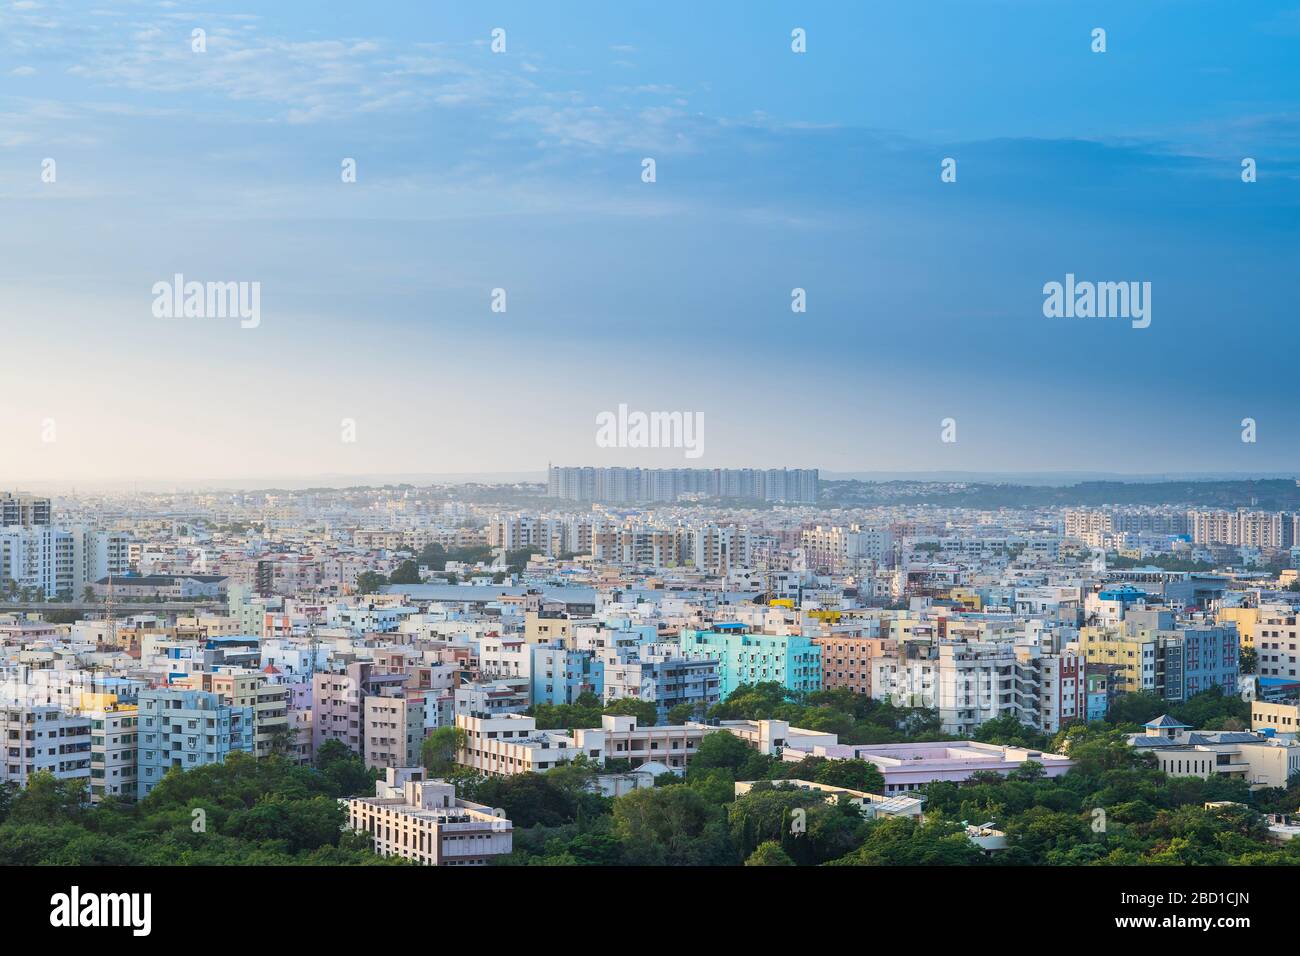 Hyderabad city buildings and skyline in India Stock Photo